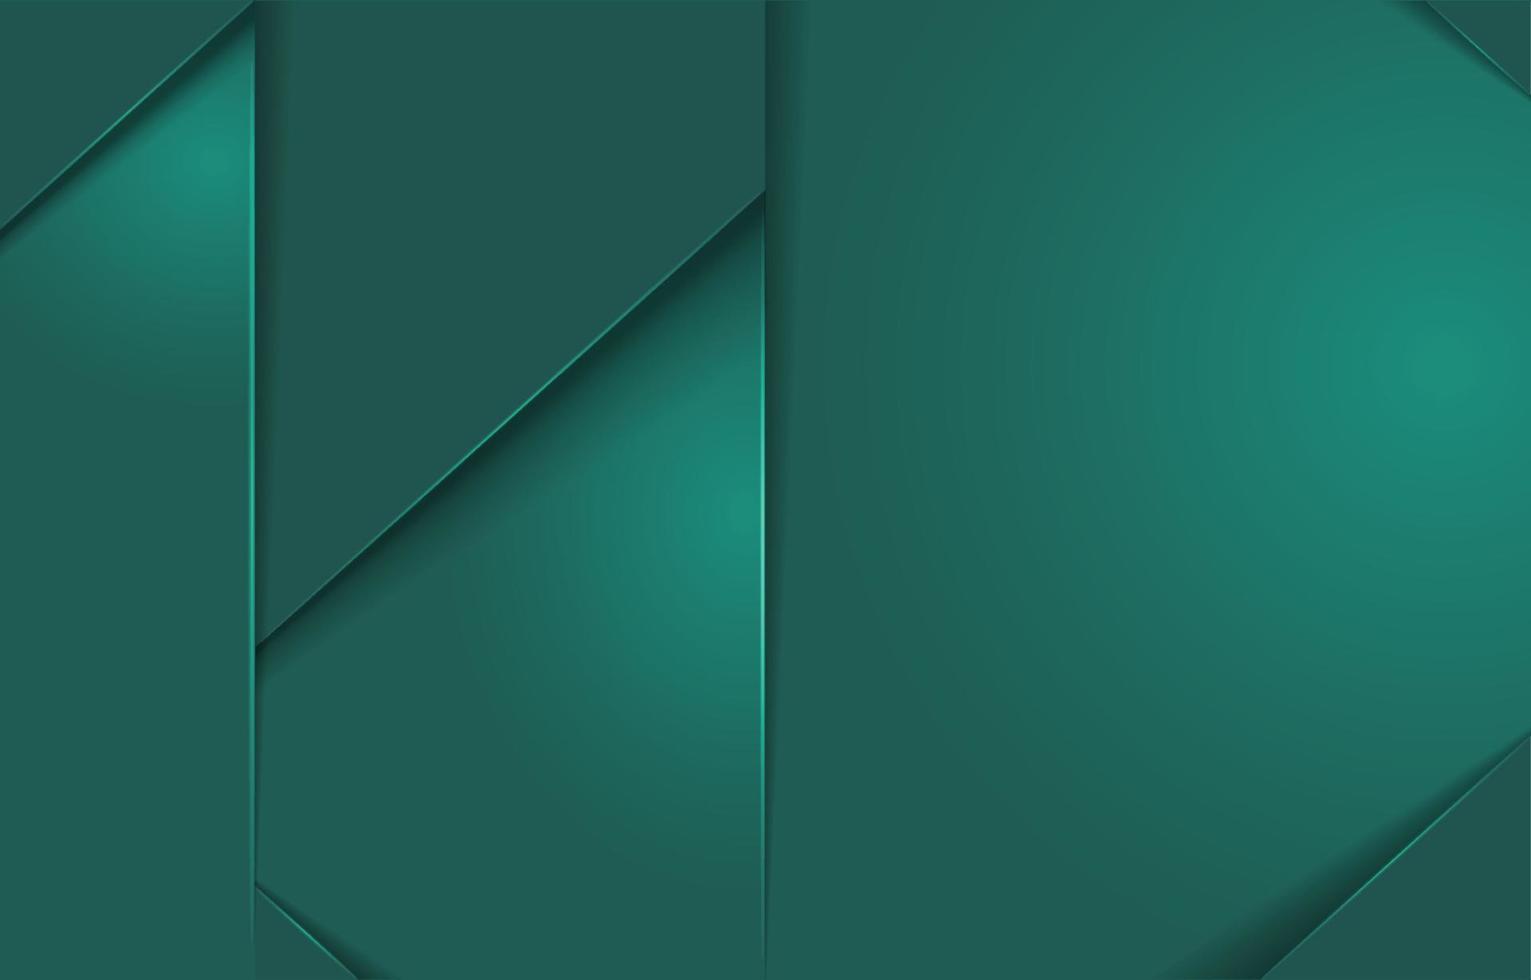 Abstract Geometric Green Background vector